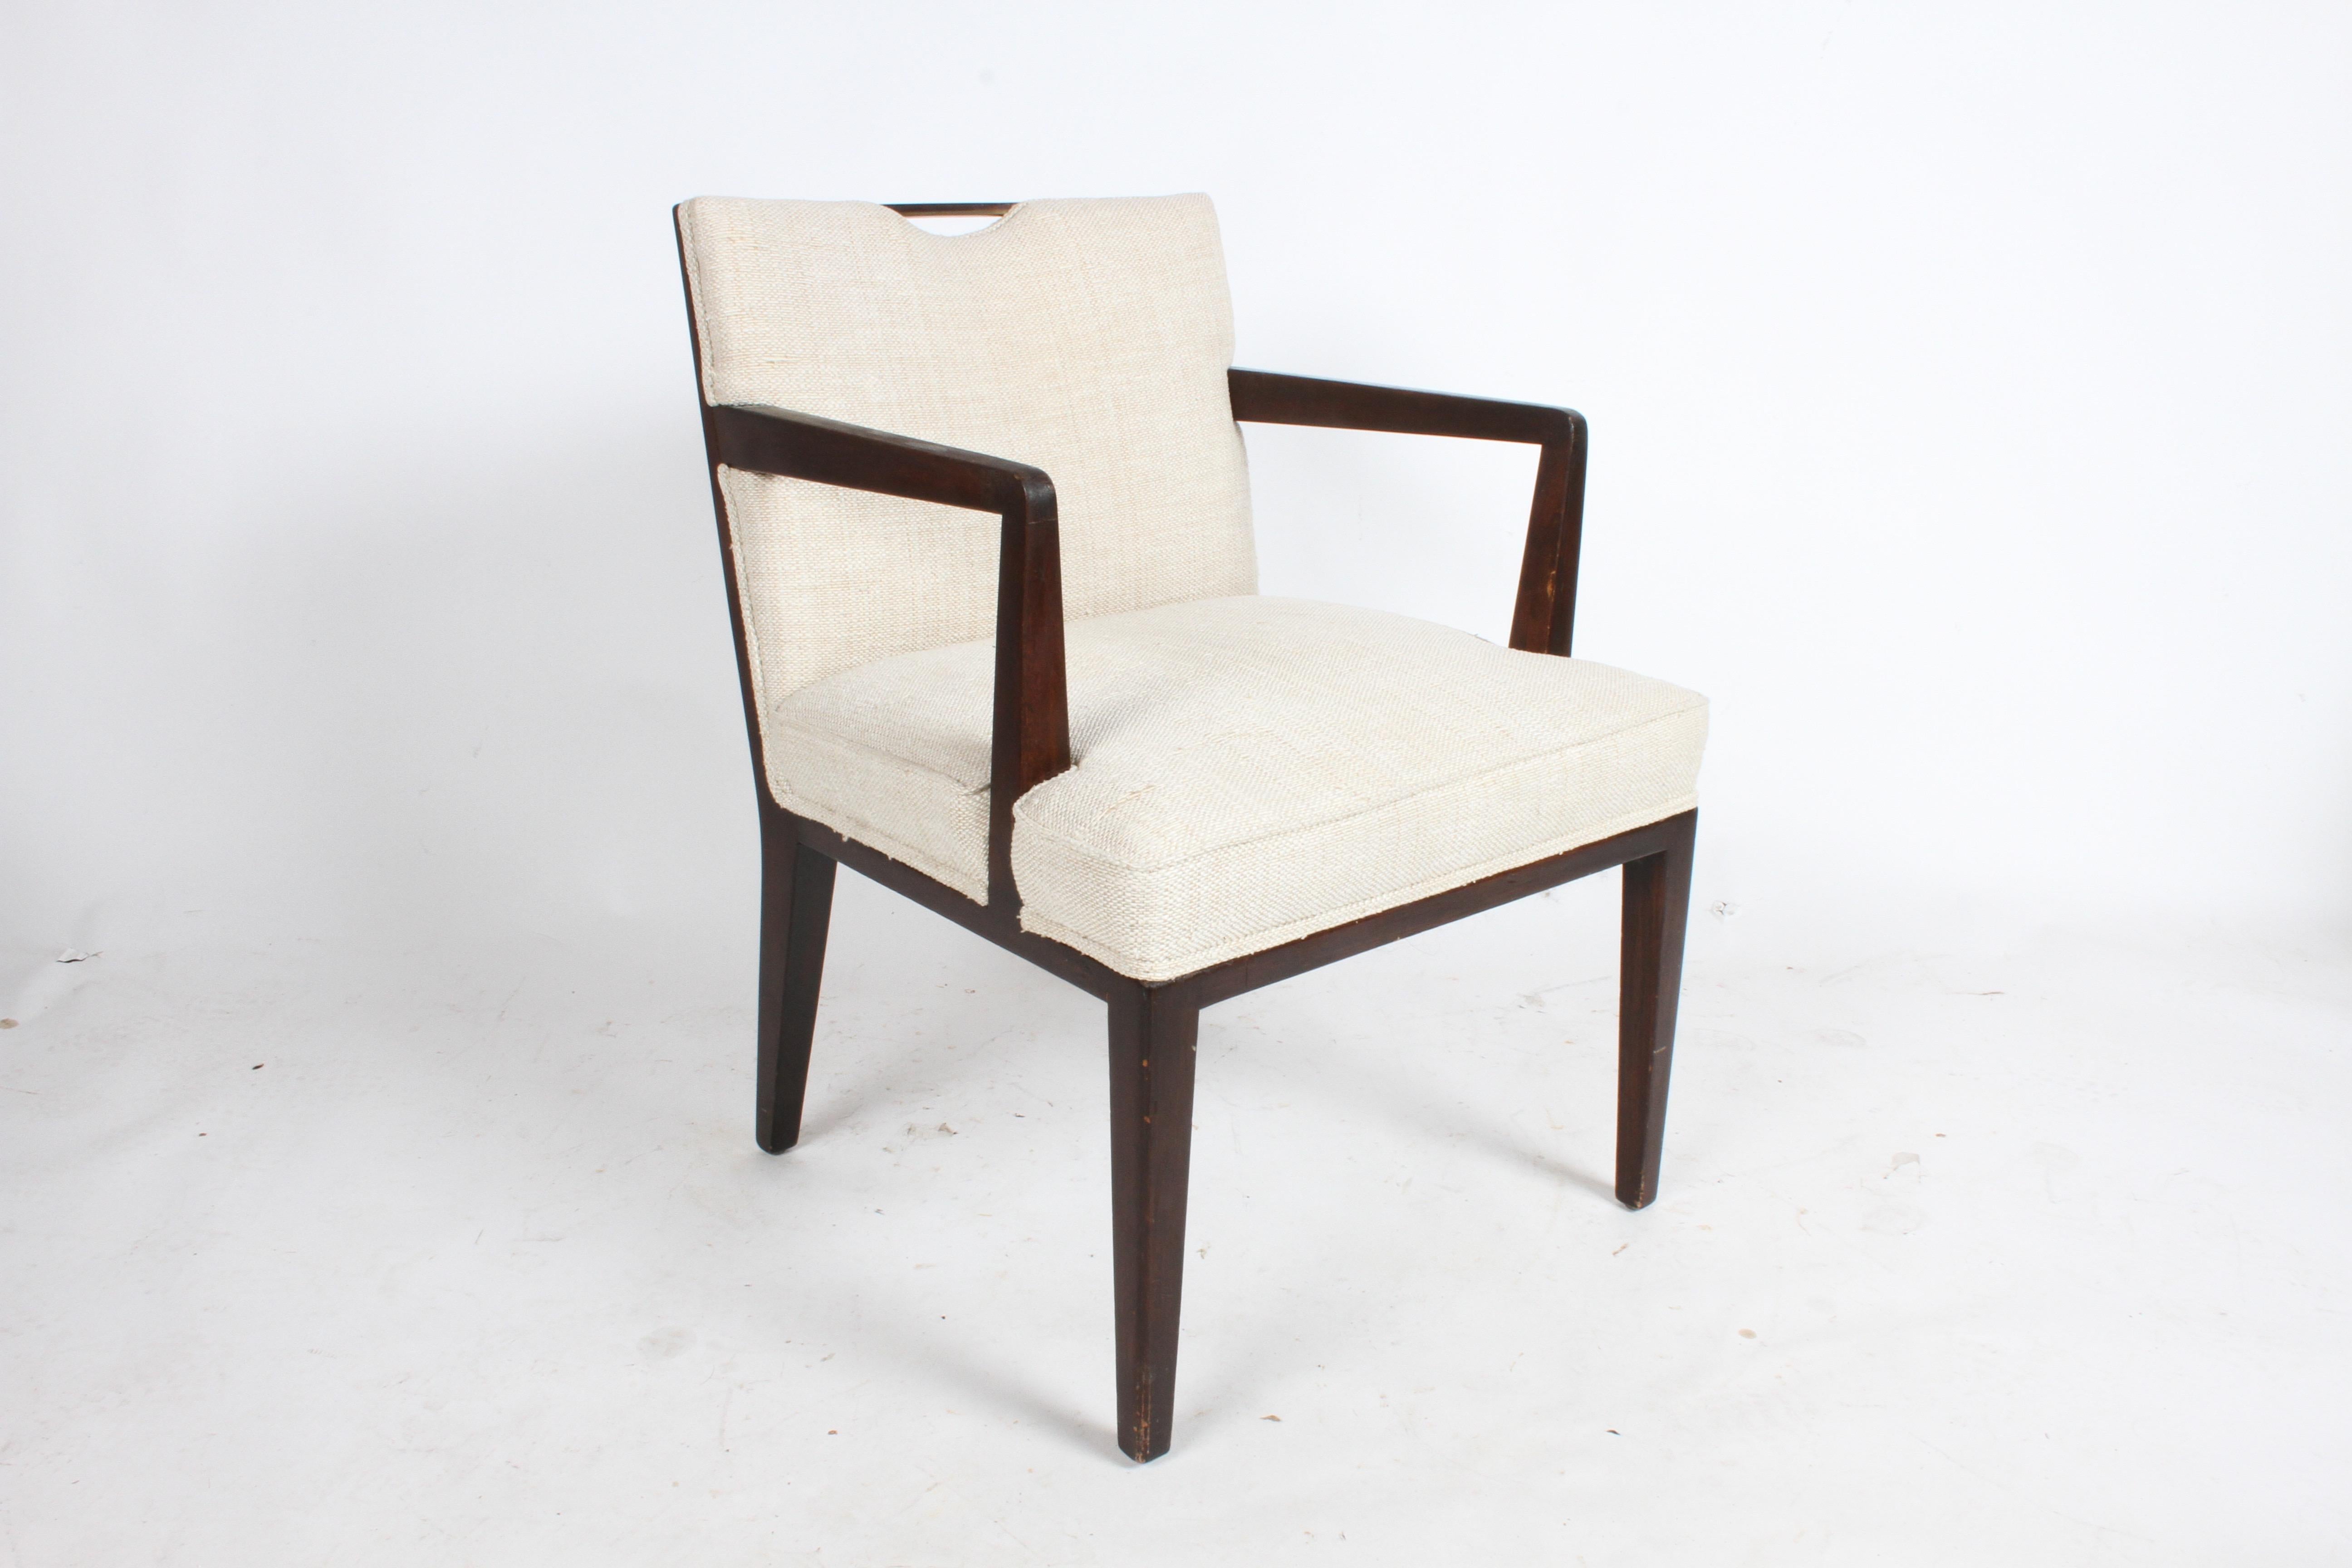 Listed are a pair of elegant Edward Wormley for Dunbar dining chairs with arms and brass handles. These are in need of restoration, perfect if your looking to add to your set. Also can be used as occasional chairs. Model 4710A, unmarked.